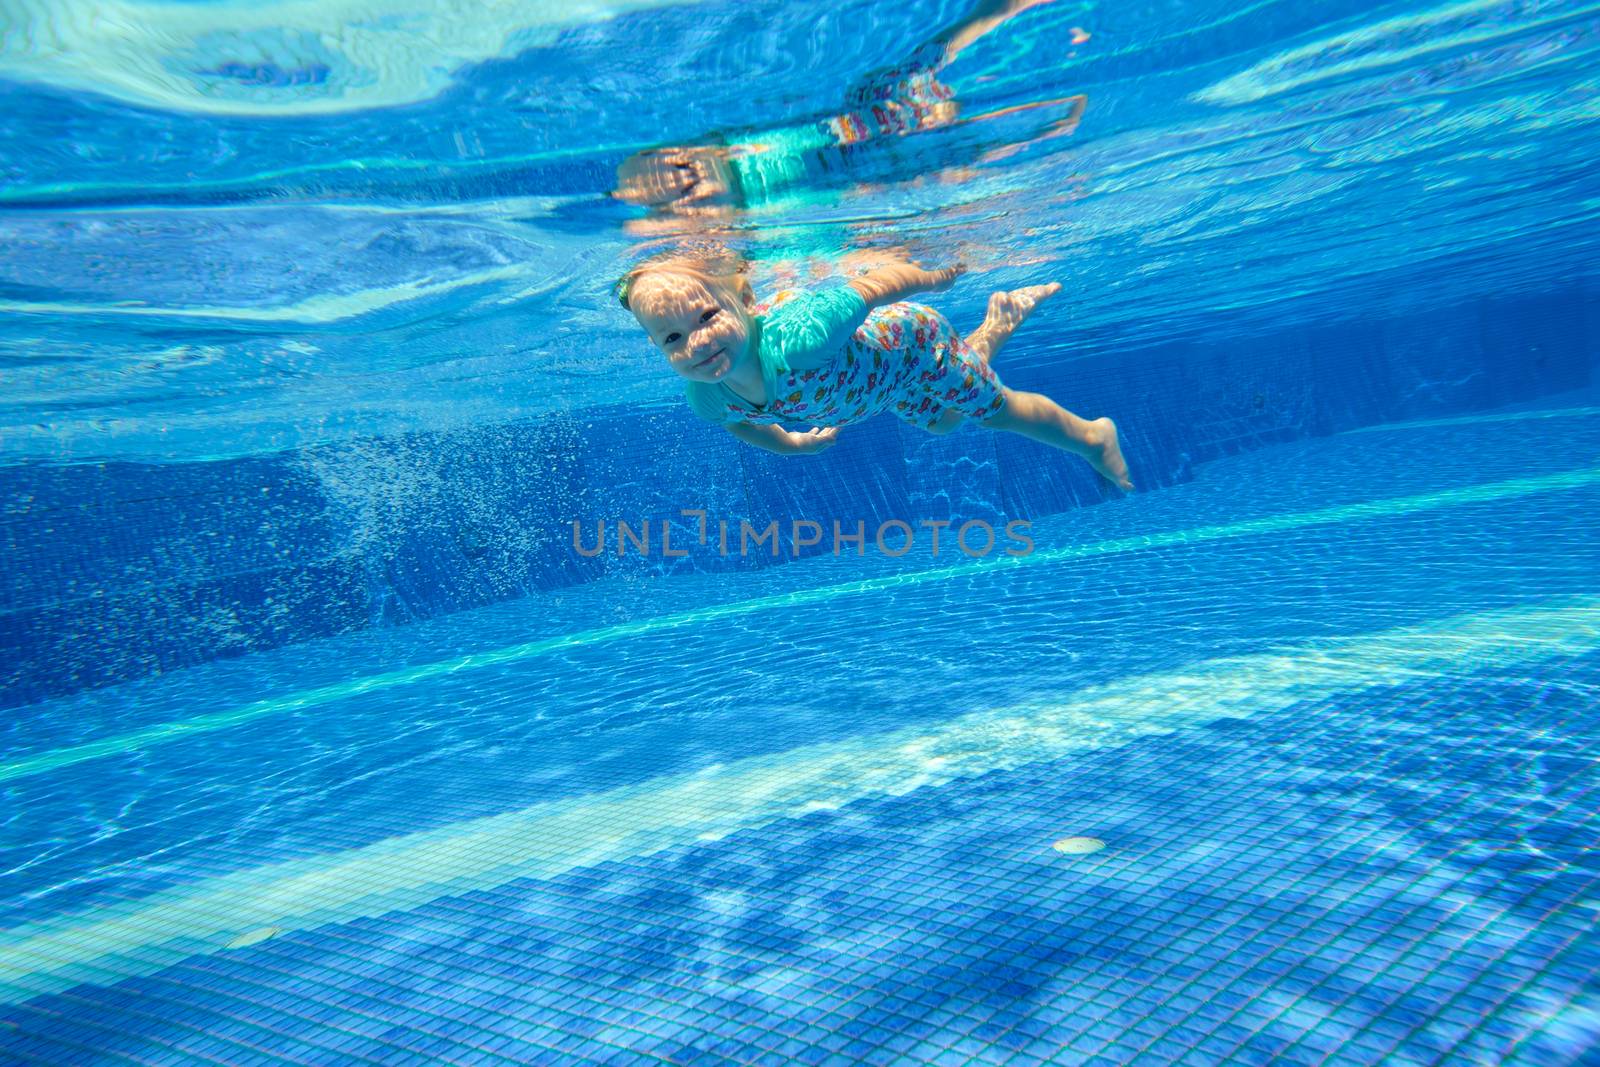 Little girl swimming underwater in the pool and smiling by rainfallsup